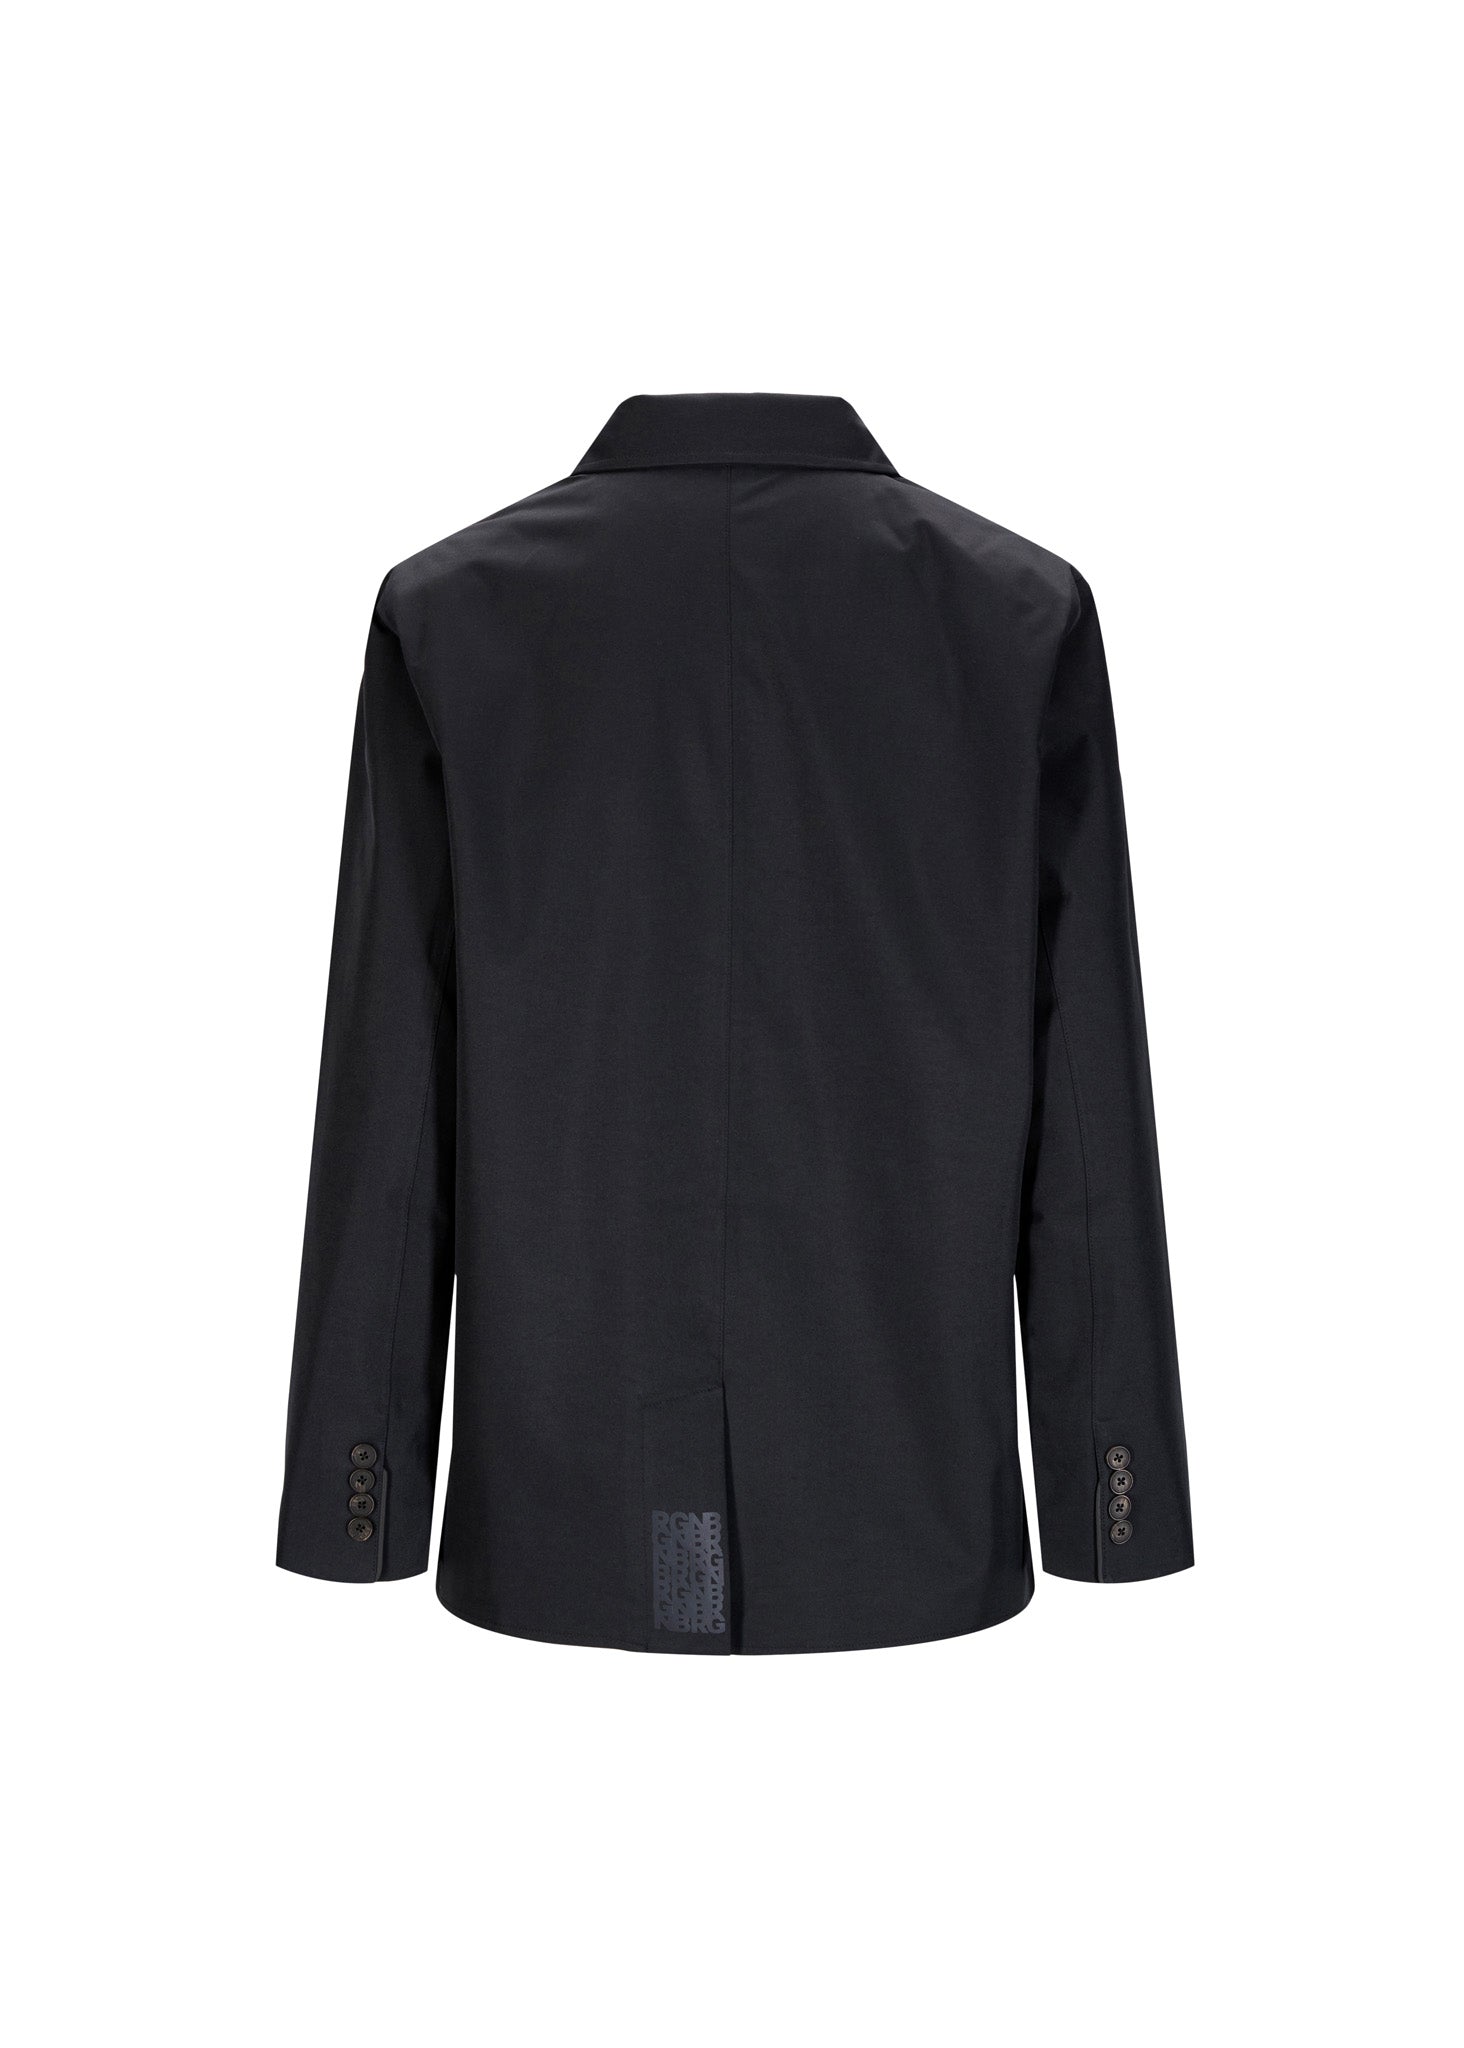 BRGN by Lunde & Gaundal Musk Blazer Coats 095 New Black